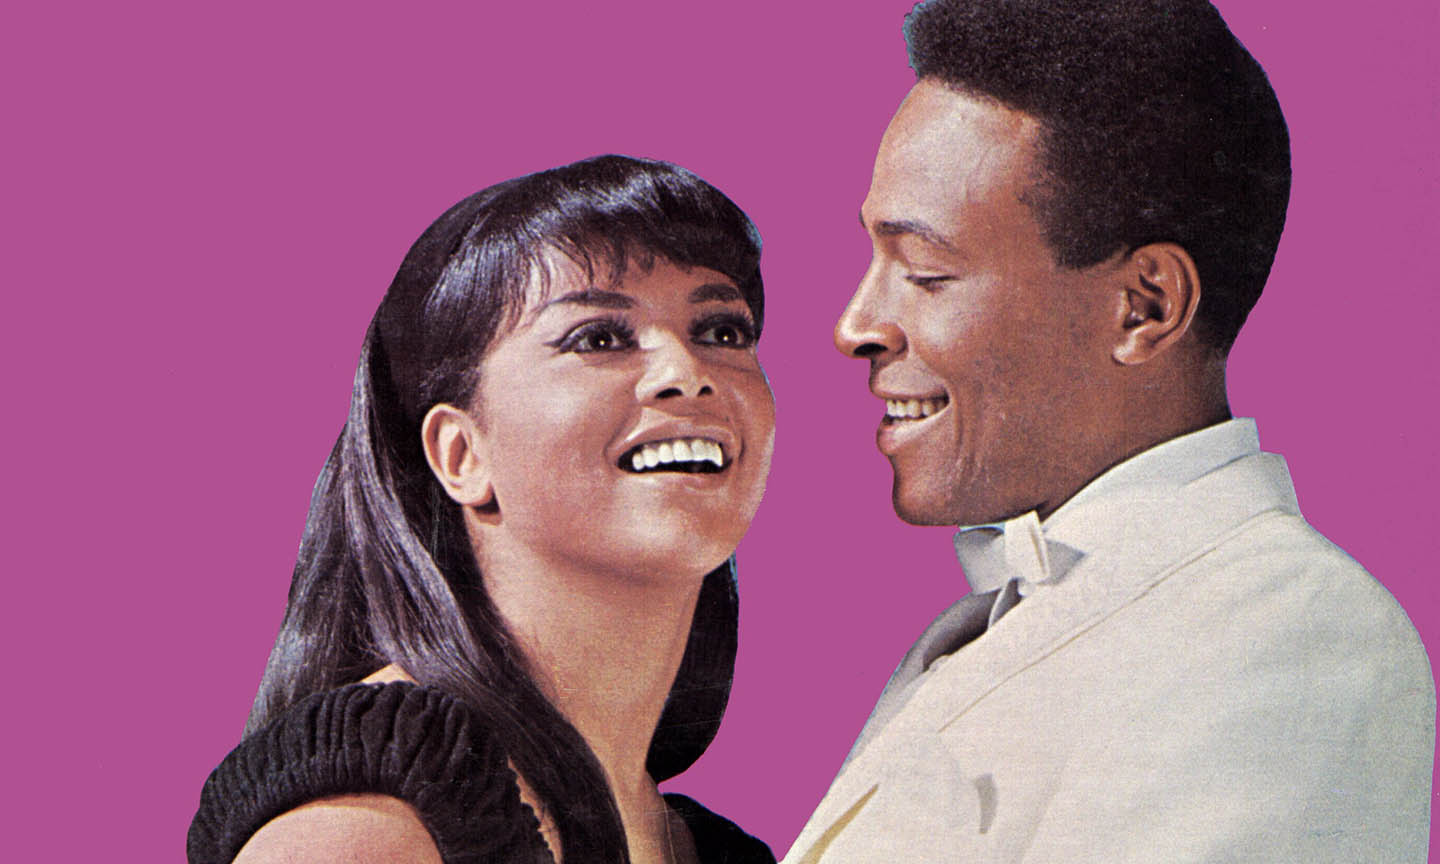 ‘Ain’t No Mountain High Enough’: Marvin And Tammi’s Towering Pop Classic